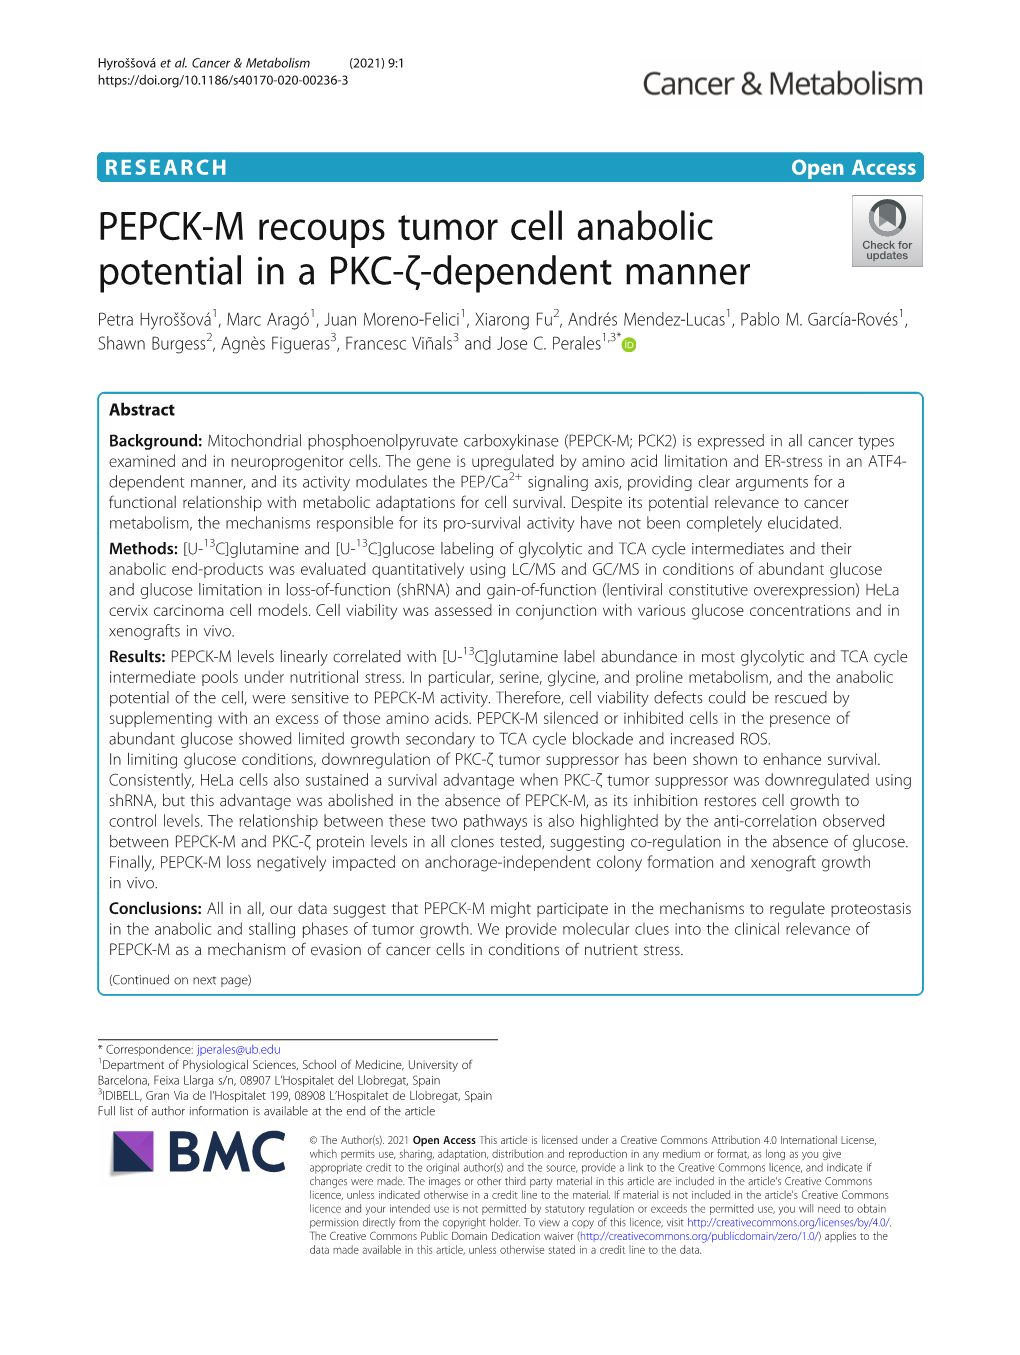 PEPCK-M Recoups Tumor Cell Anabolic Potential in a PKC-Ζ-Dependent